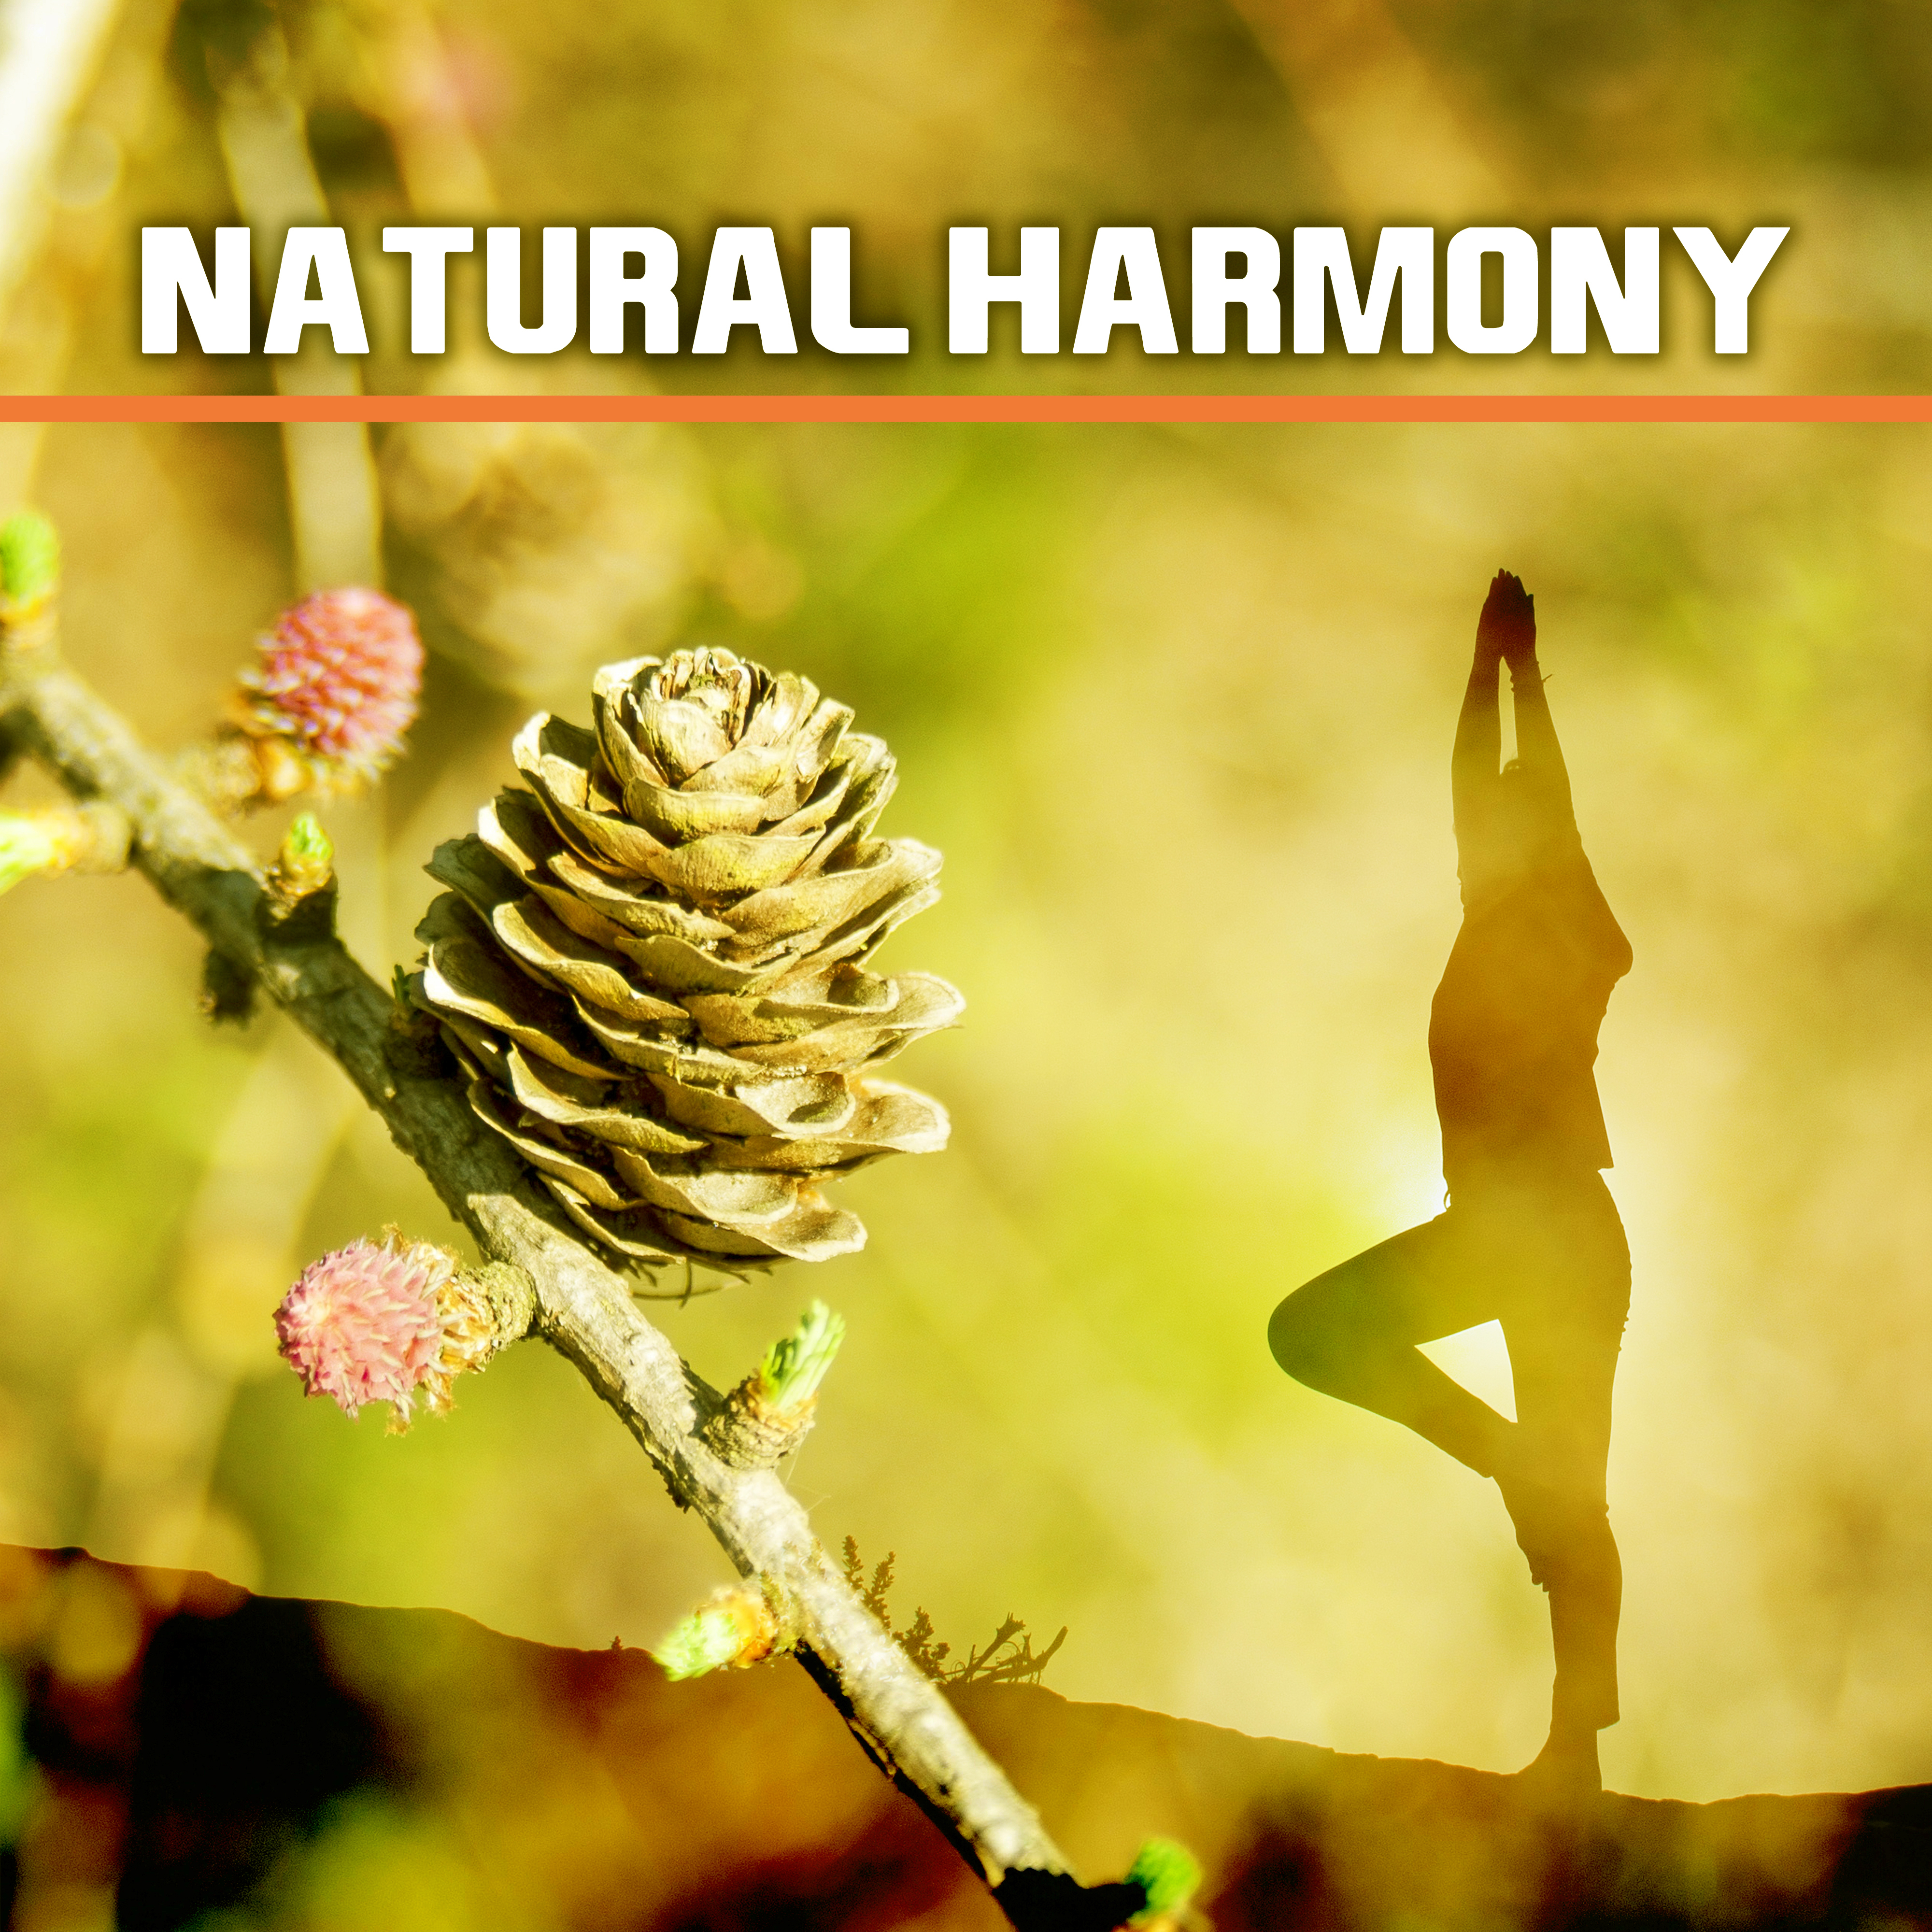 Natural Harmony  Nature Souds, Relaxation, Rest, Relief Stress, Relaxing Music Therapy, New Age